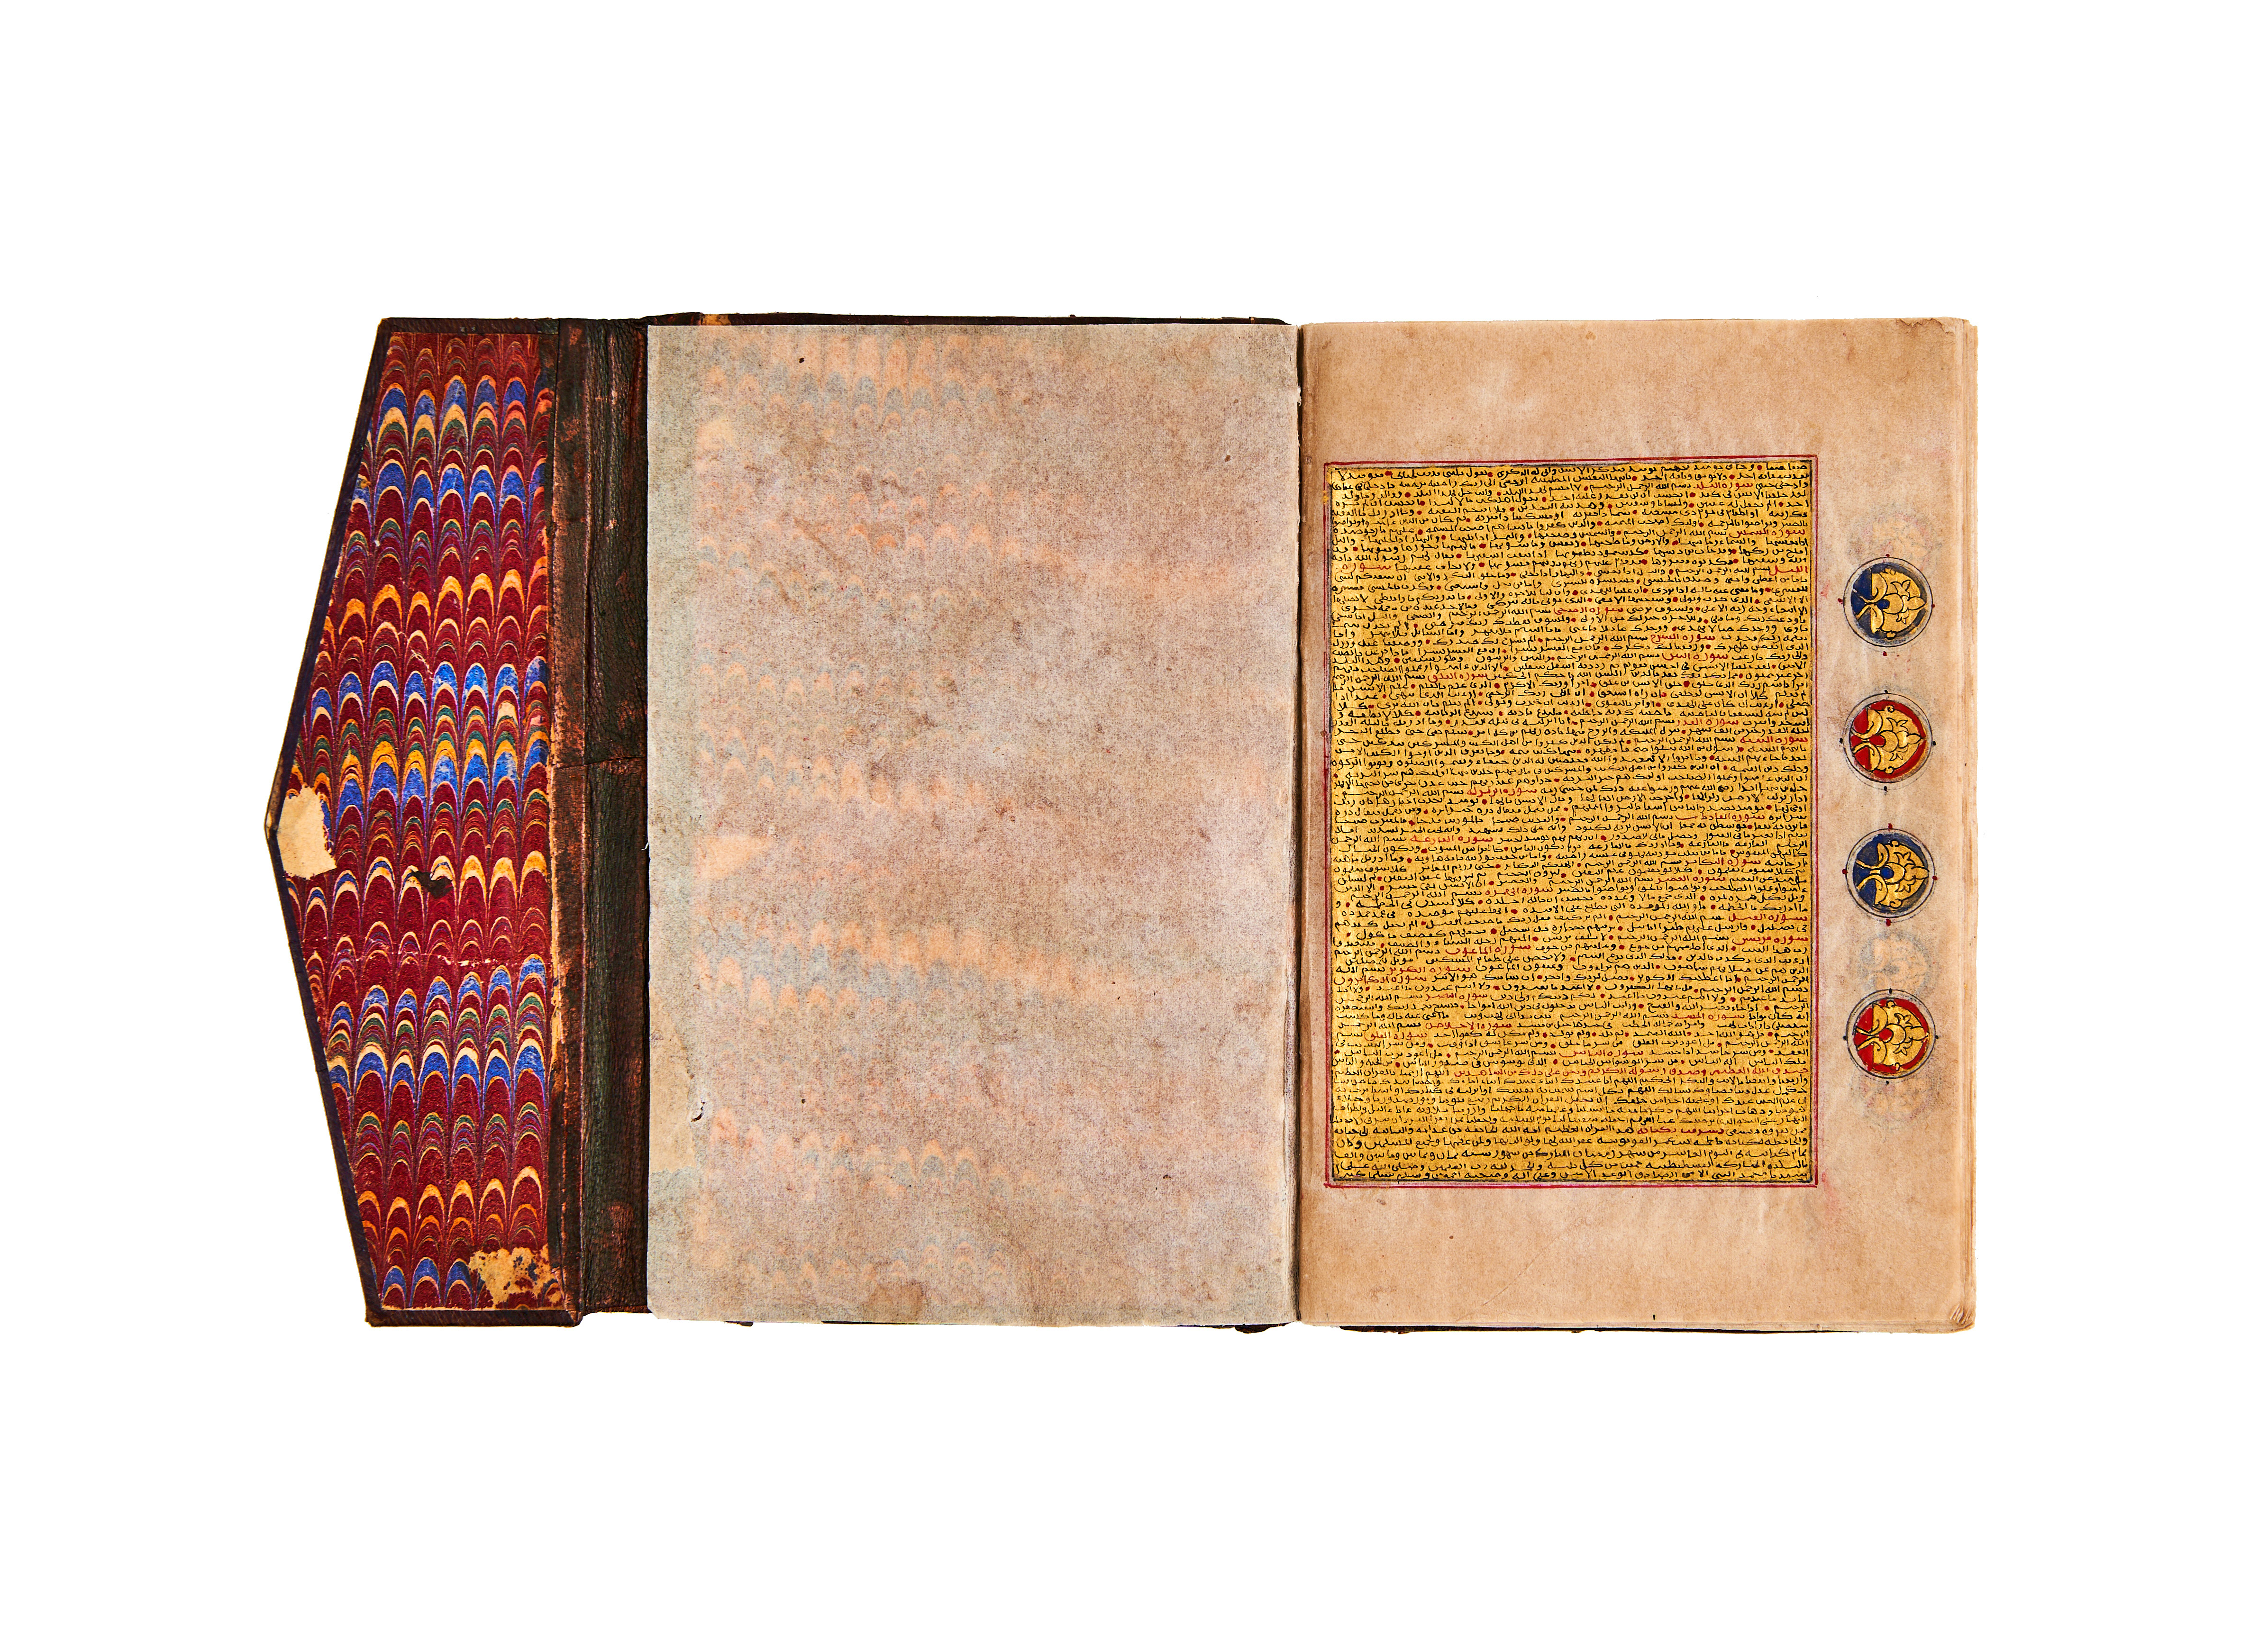 A COMPLETE GOLD MINIATURE QURAN, FOR HIS EXCELLENCE ABU ABDALLAH YUSEF, DATED 1288AH, COPIED BY FAT - Image 8 of 9